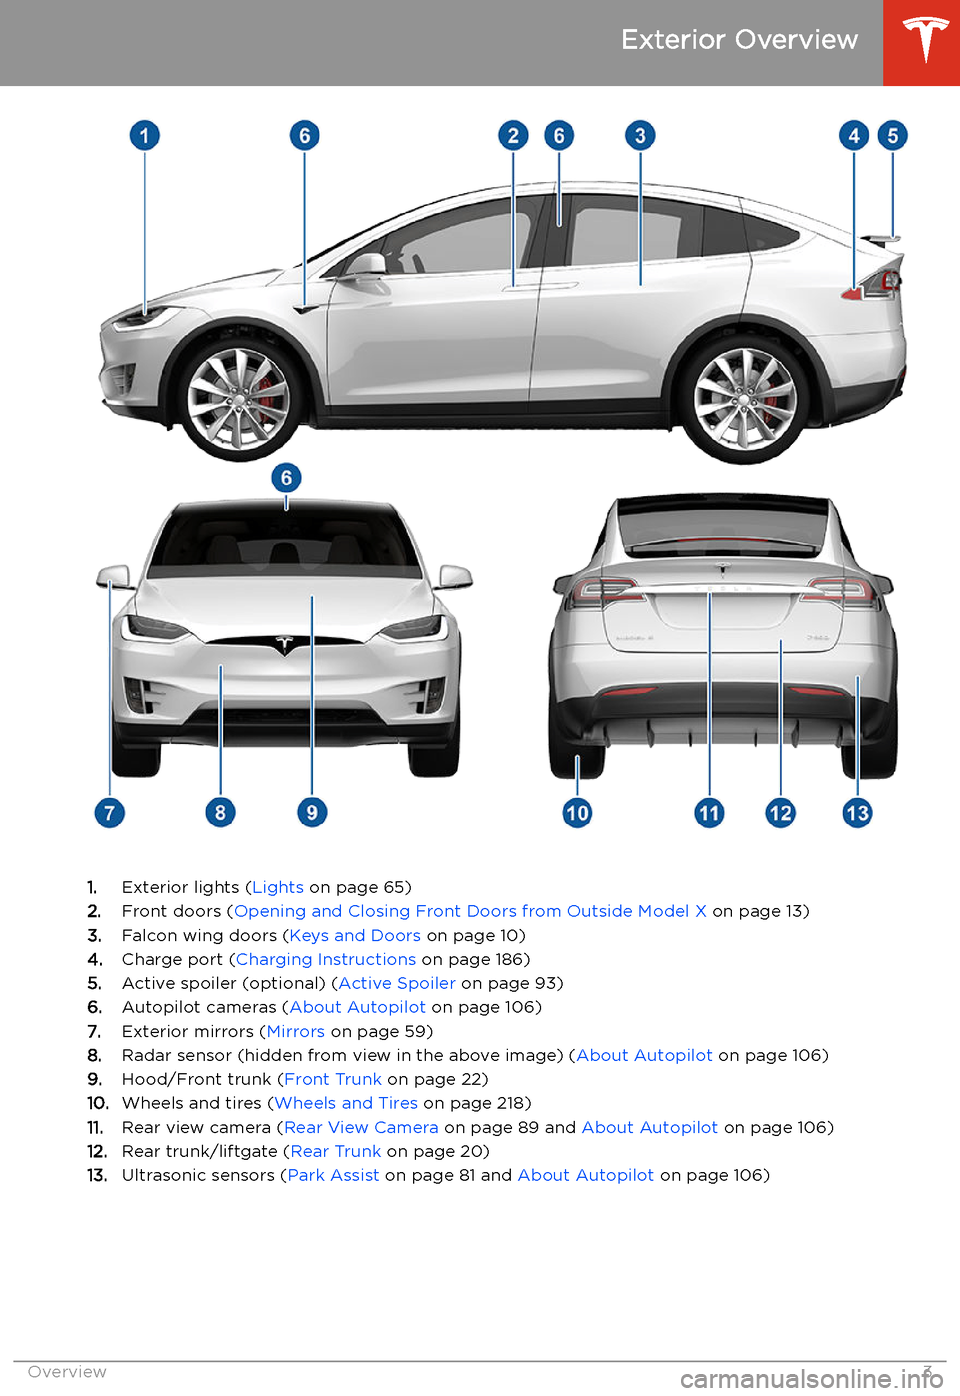 TESLA MODEL X 2020  Owners Manual Exterior Overview
1.Exterior lights ( Lights on page 65)
2. Front doors ( Opening and Closing Front Doors from Outside Model X  on page 13)
3. Falcon wing doors ( Keys and Doors on page 10)
4. Charge 